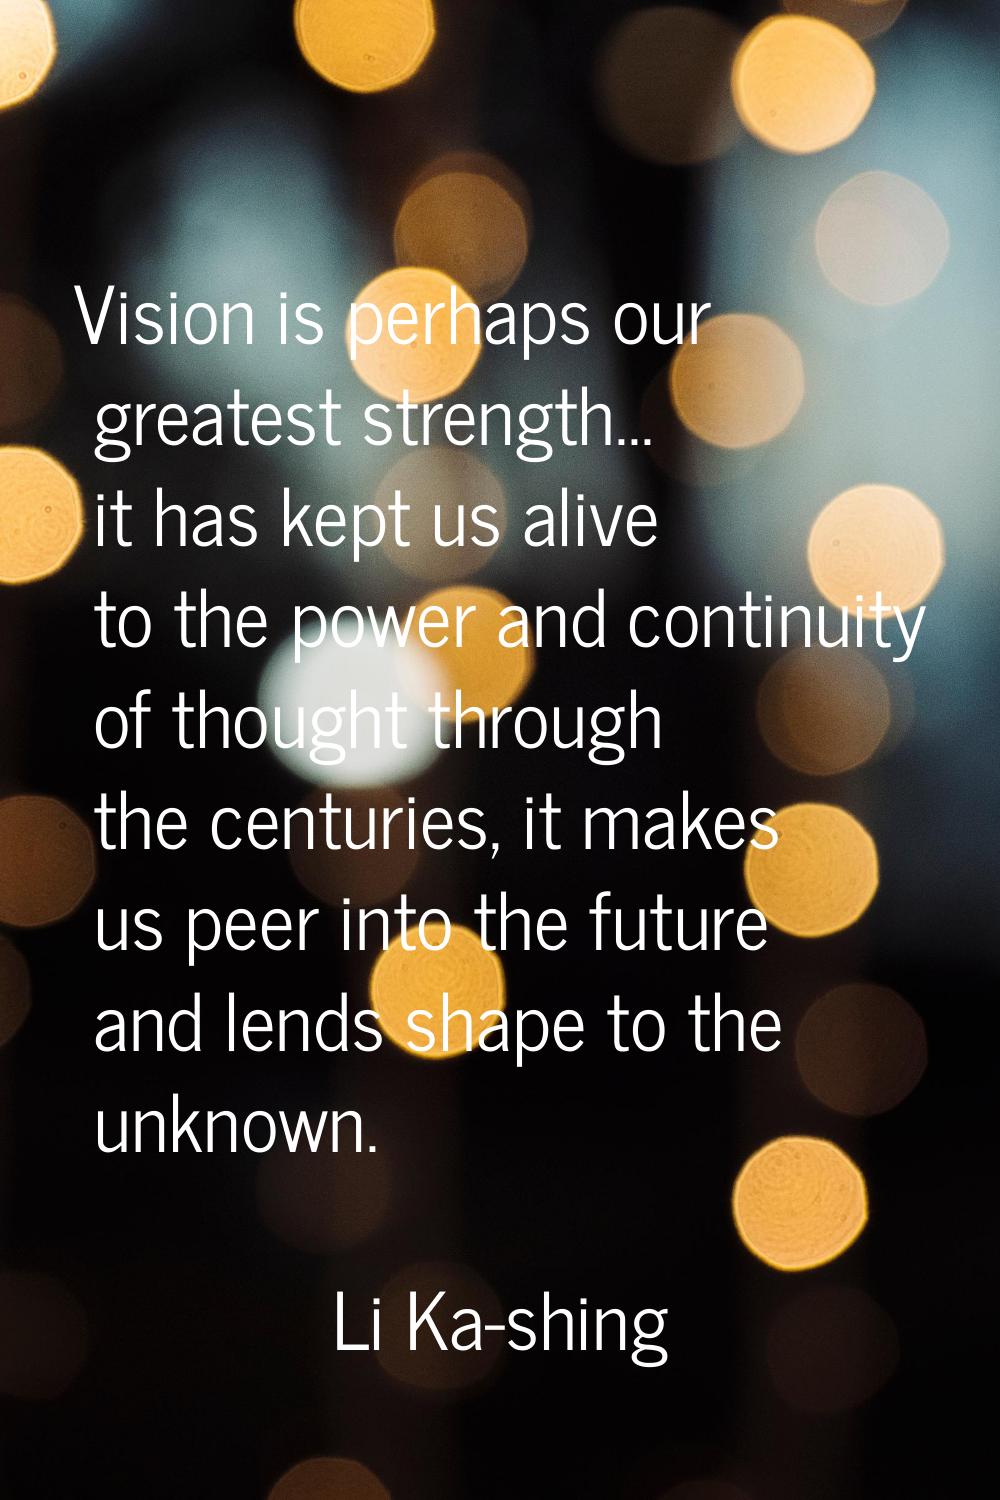 Vision is perhaps our greatest strength... it has kept us alive to the power and continuity of thou